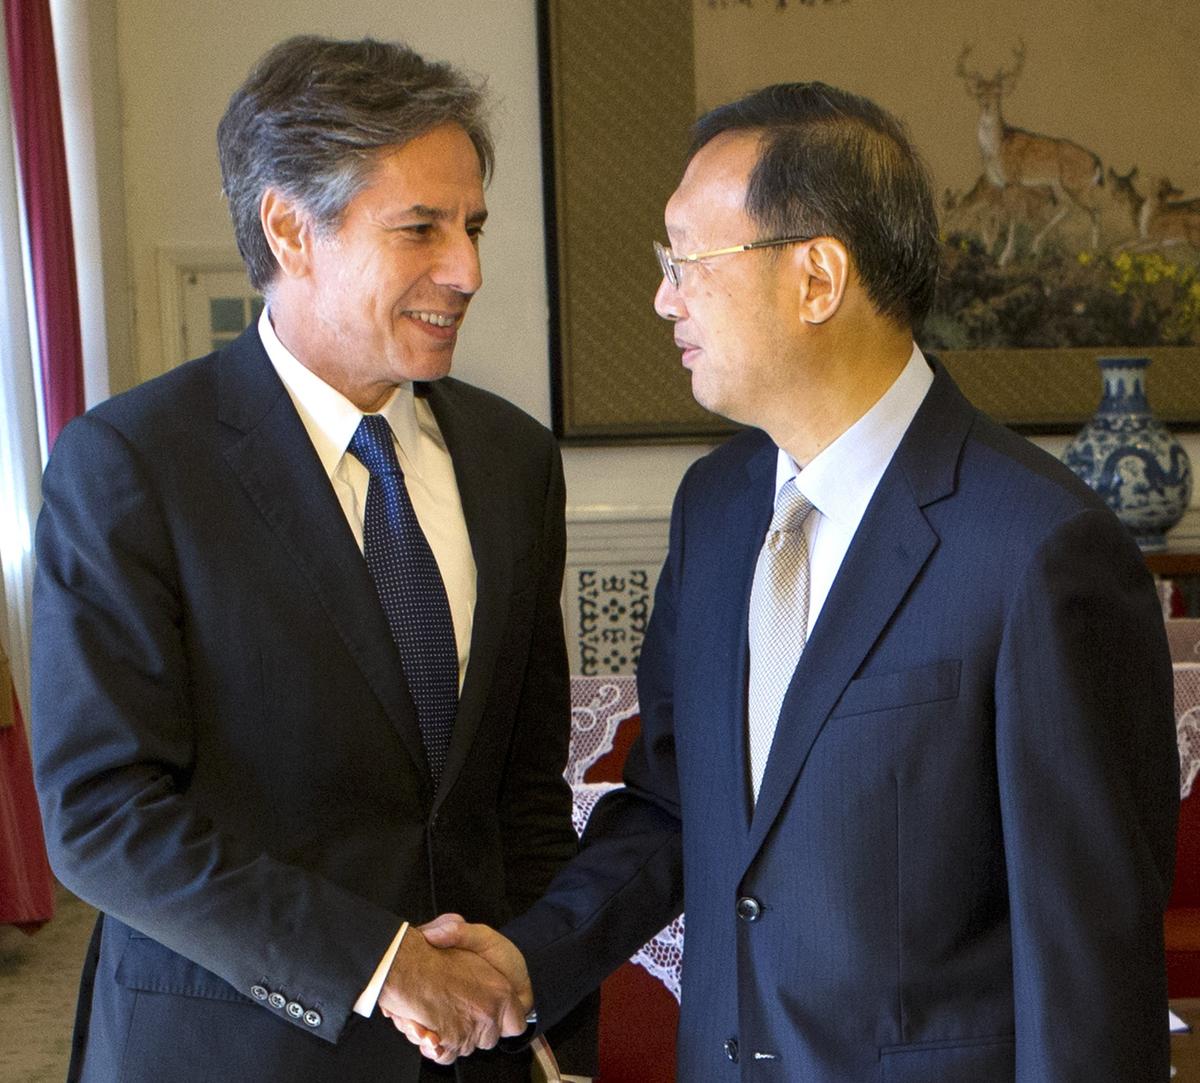 U.S. Deputy Secretary of State Antony Blinken shakes hands with Chinese State Councilor Yang Jiechi as Blinken arrives for a meeting at the Zhongnanhai Leadership Compound in Beijing, China, on Oct. 8, 2015. (Mark Schiefelbein/AFP via Getty Images)